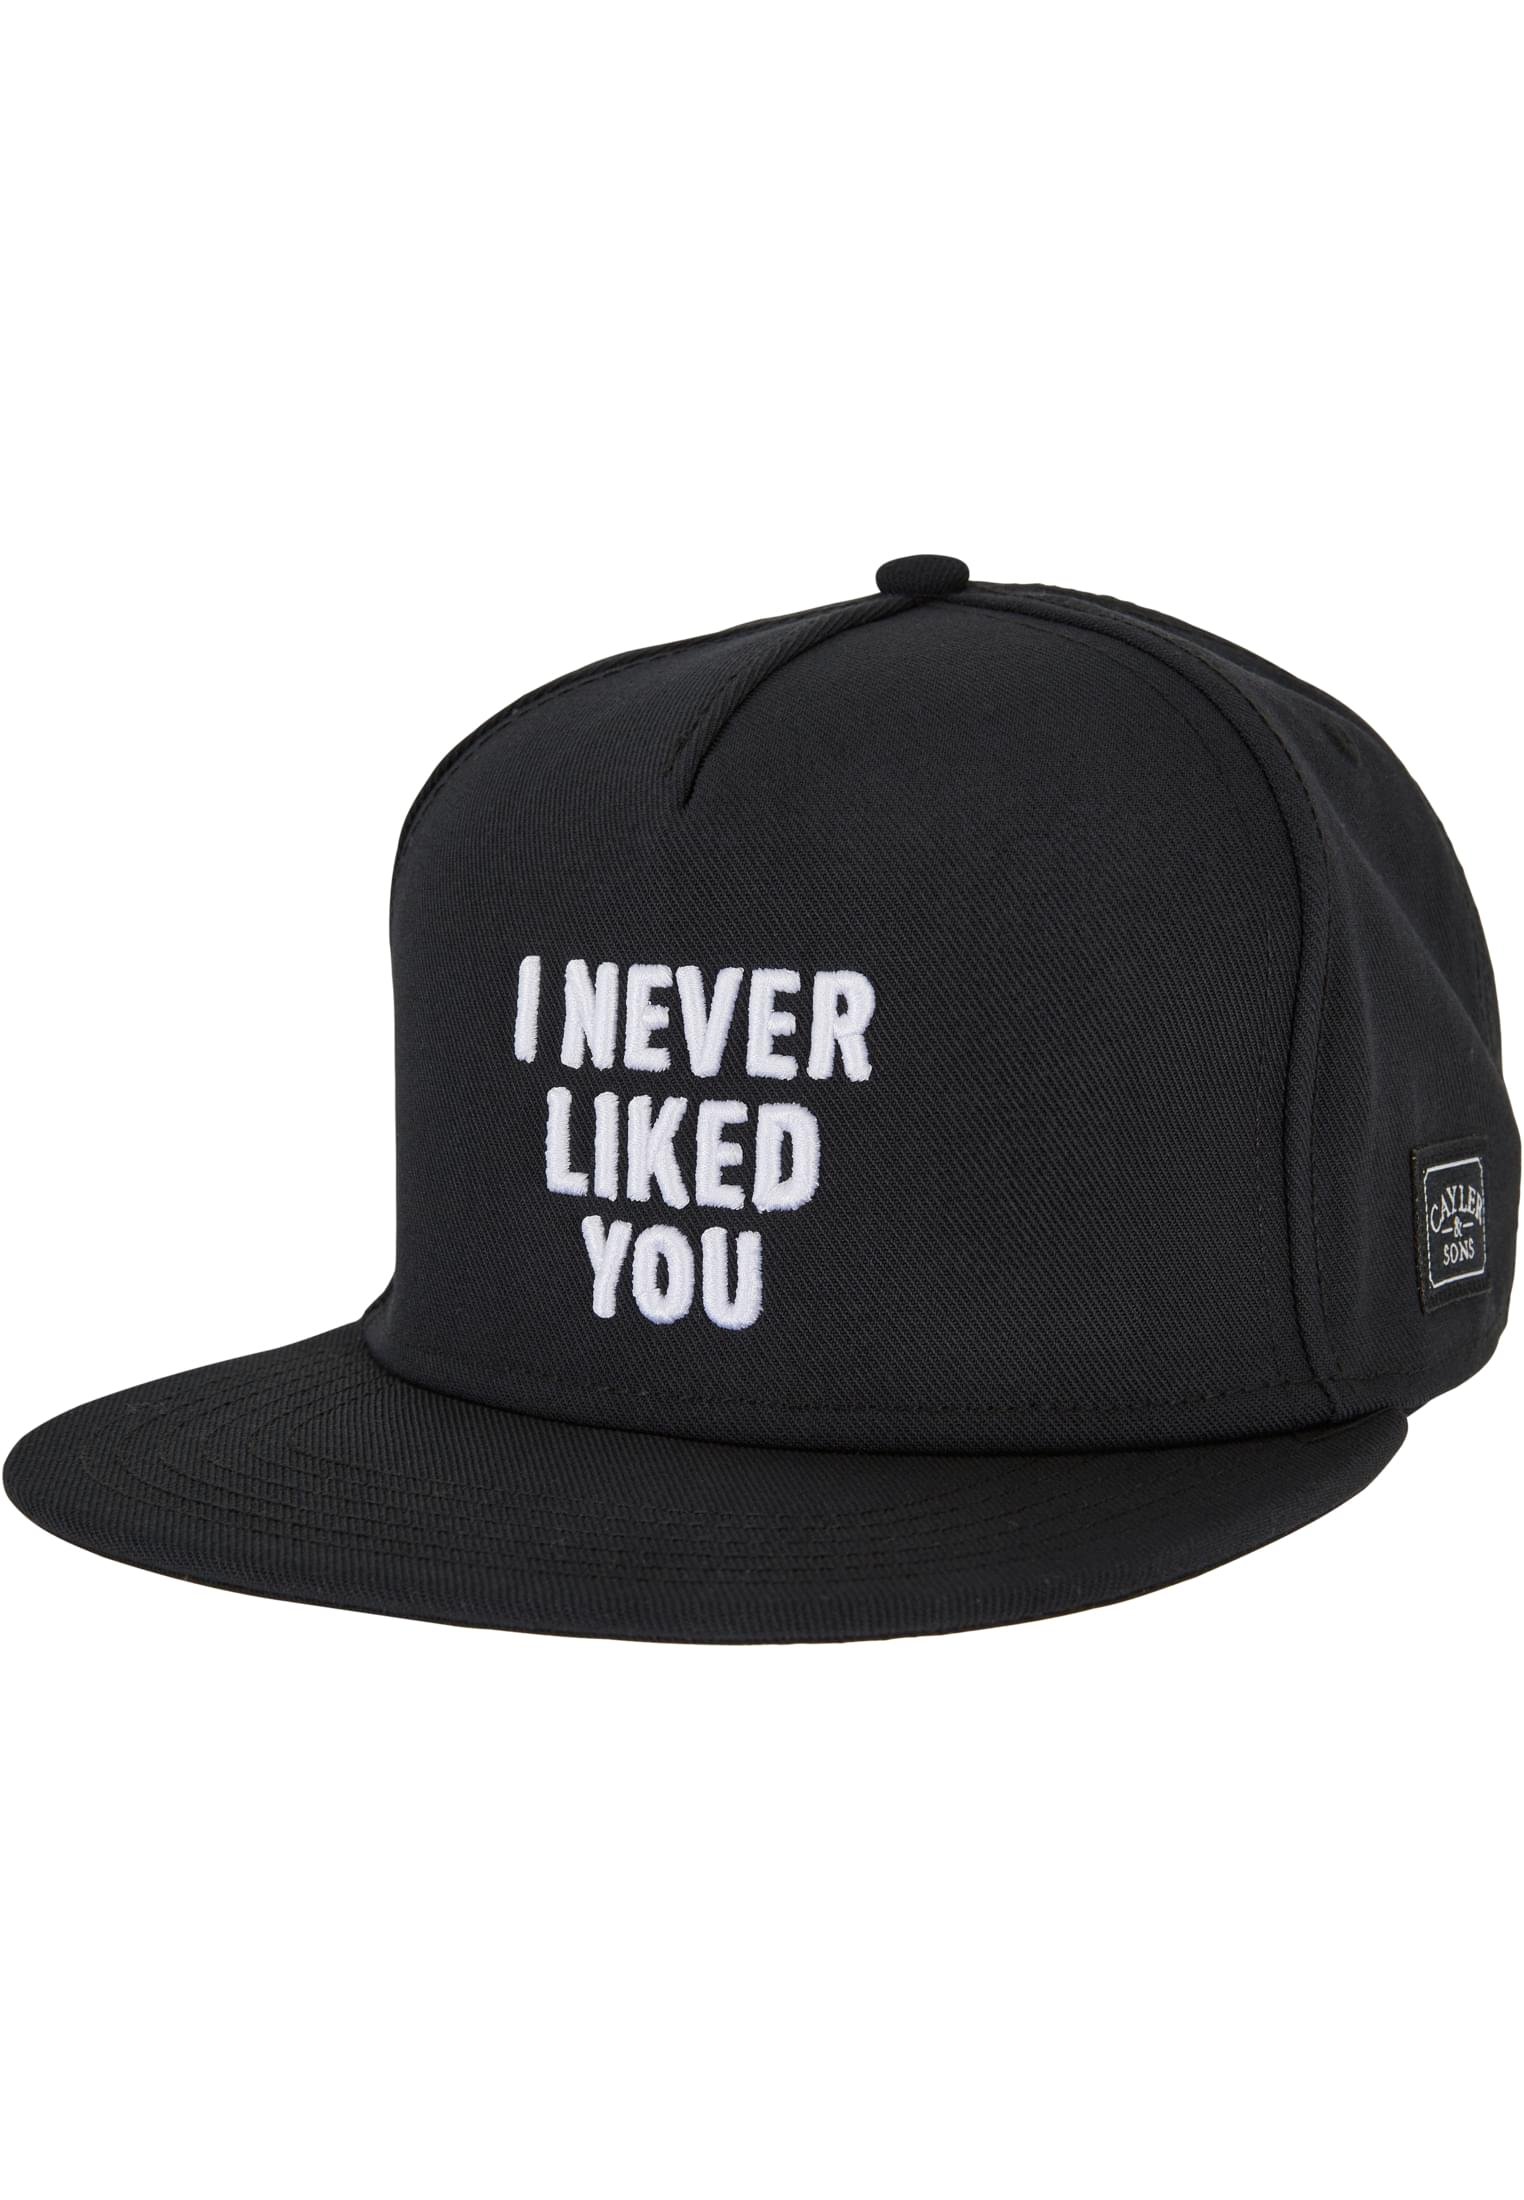 Never Liked You P Cap black one size